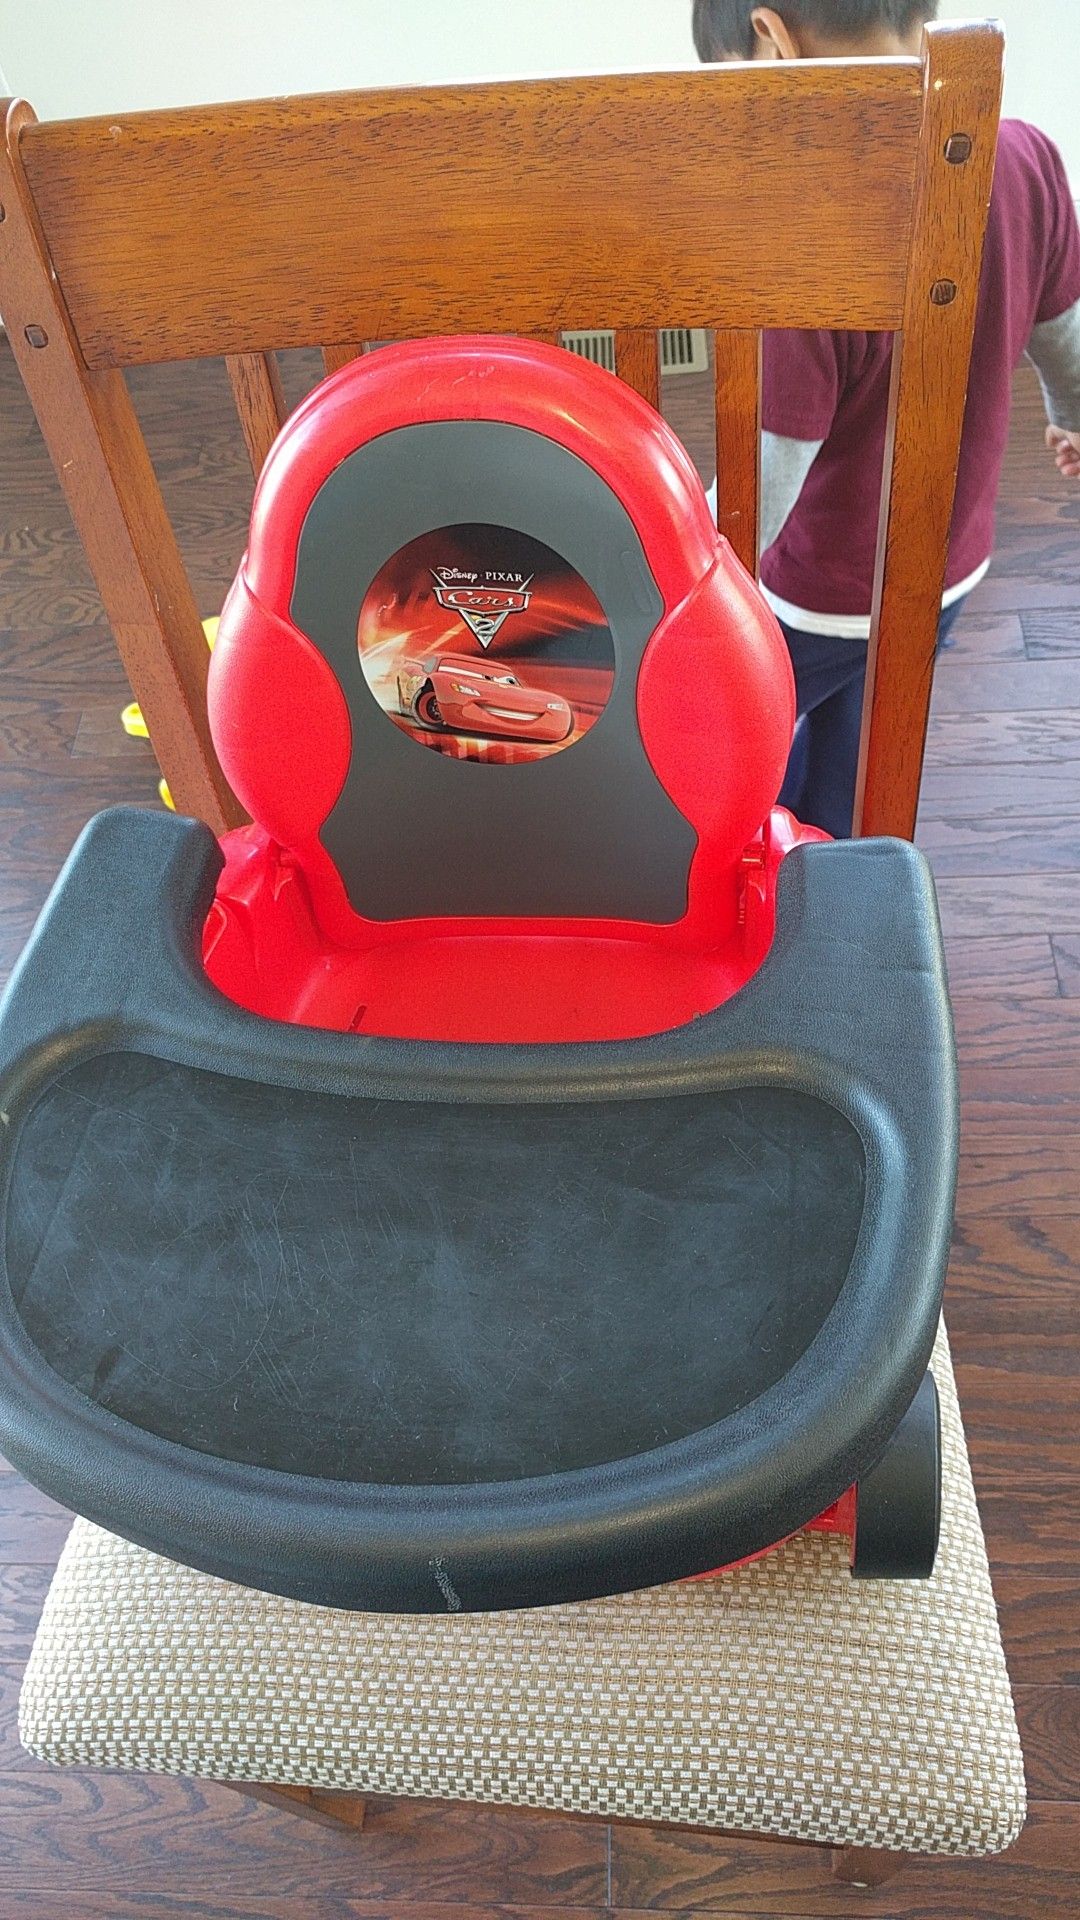 CARS Infant Booster seat